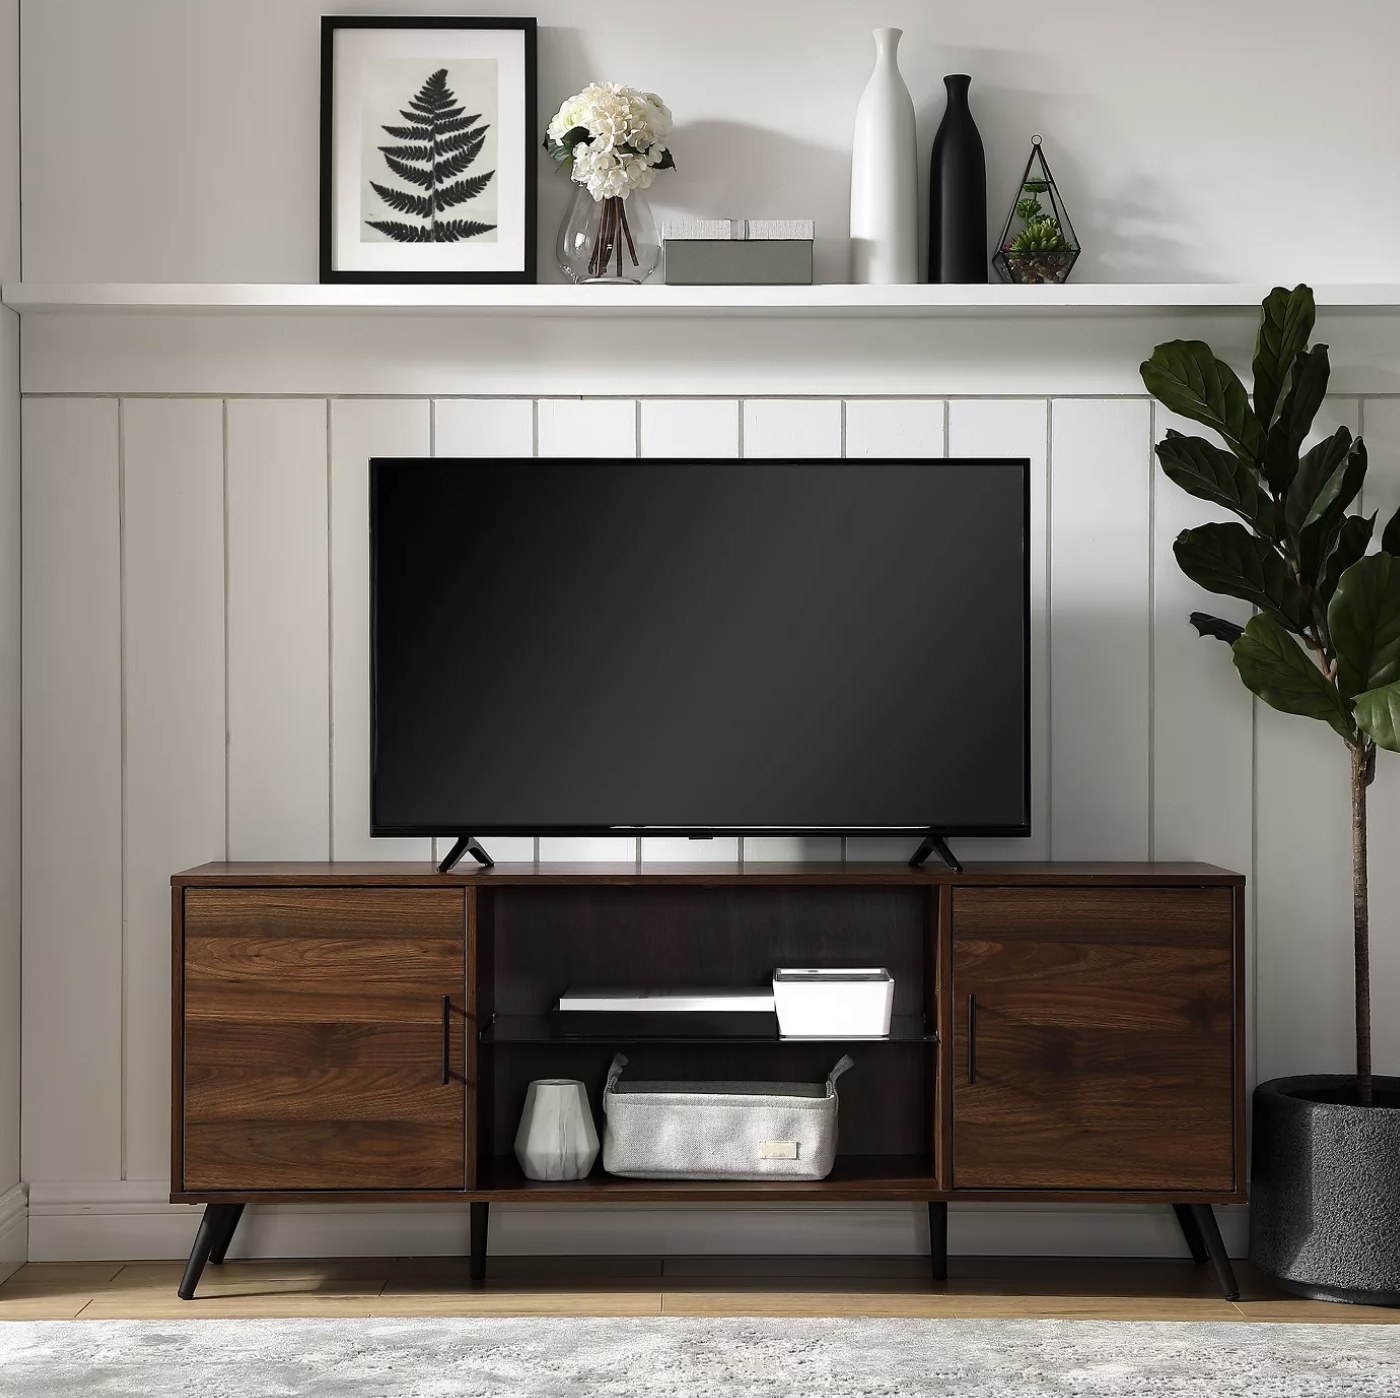 A wood TV stand